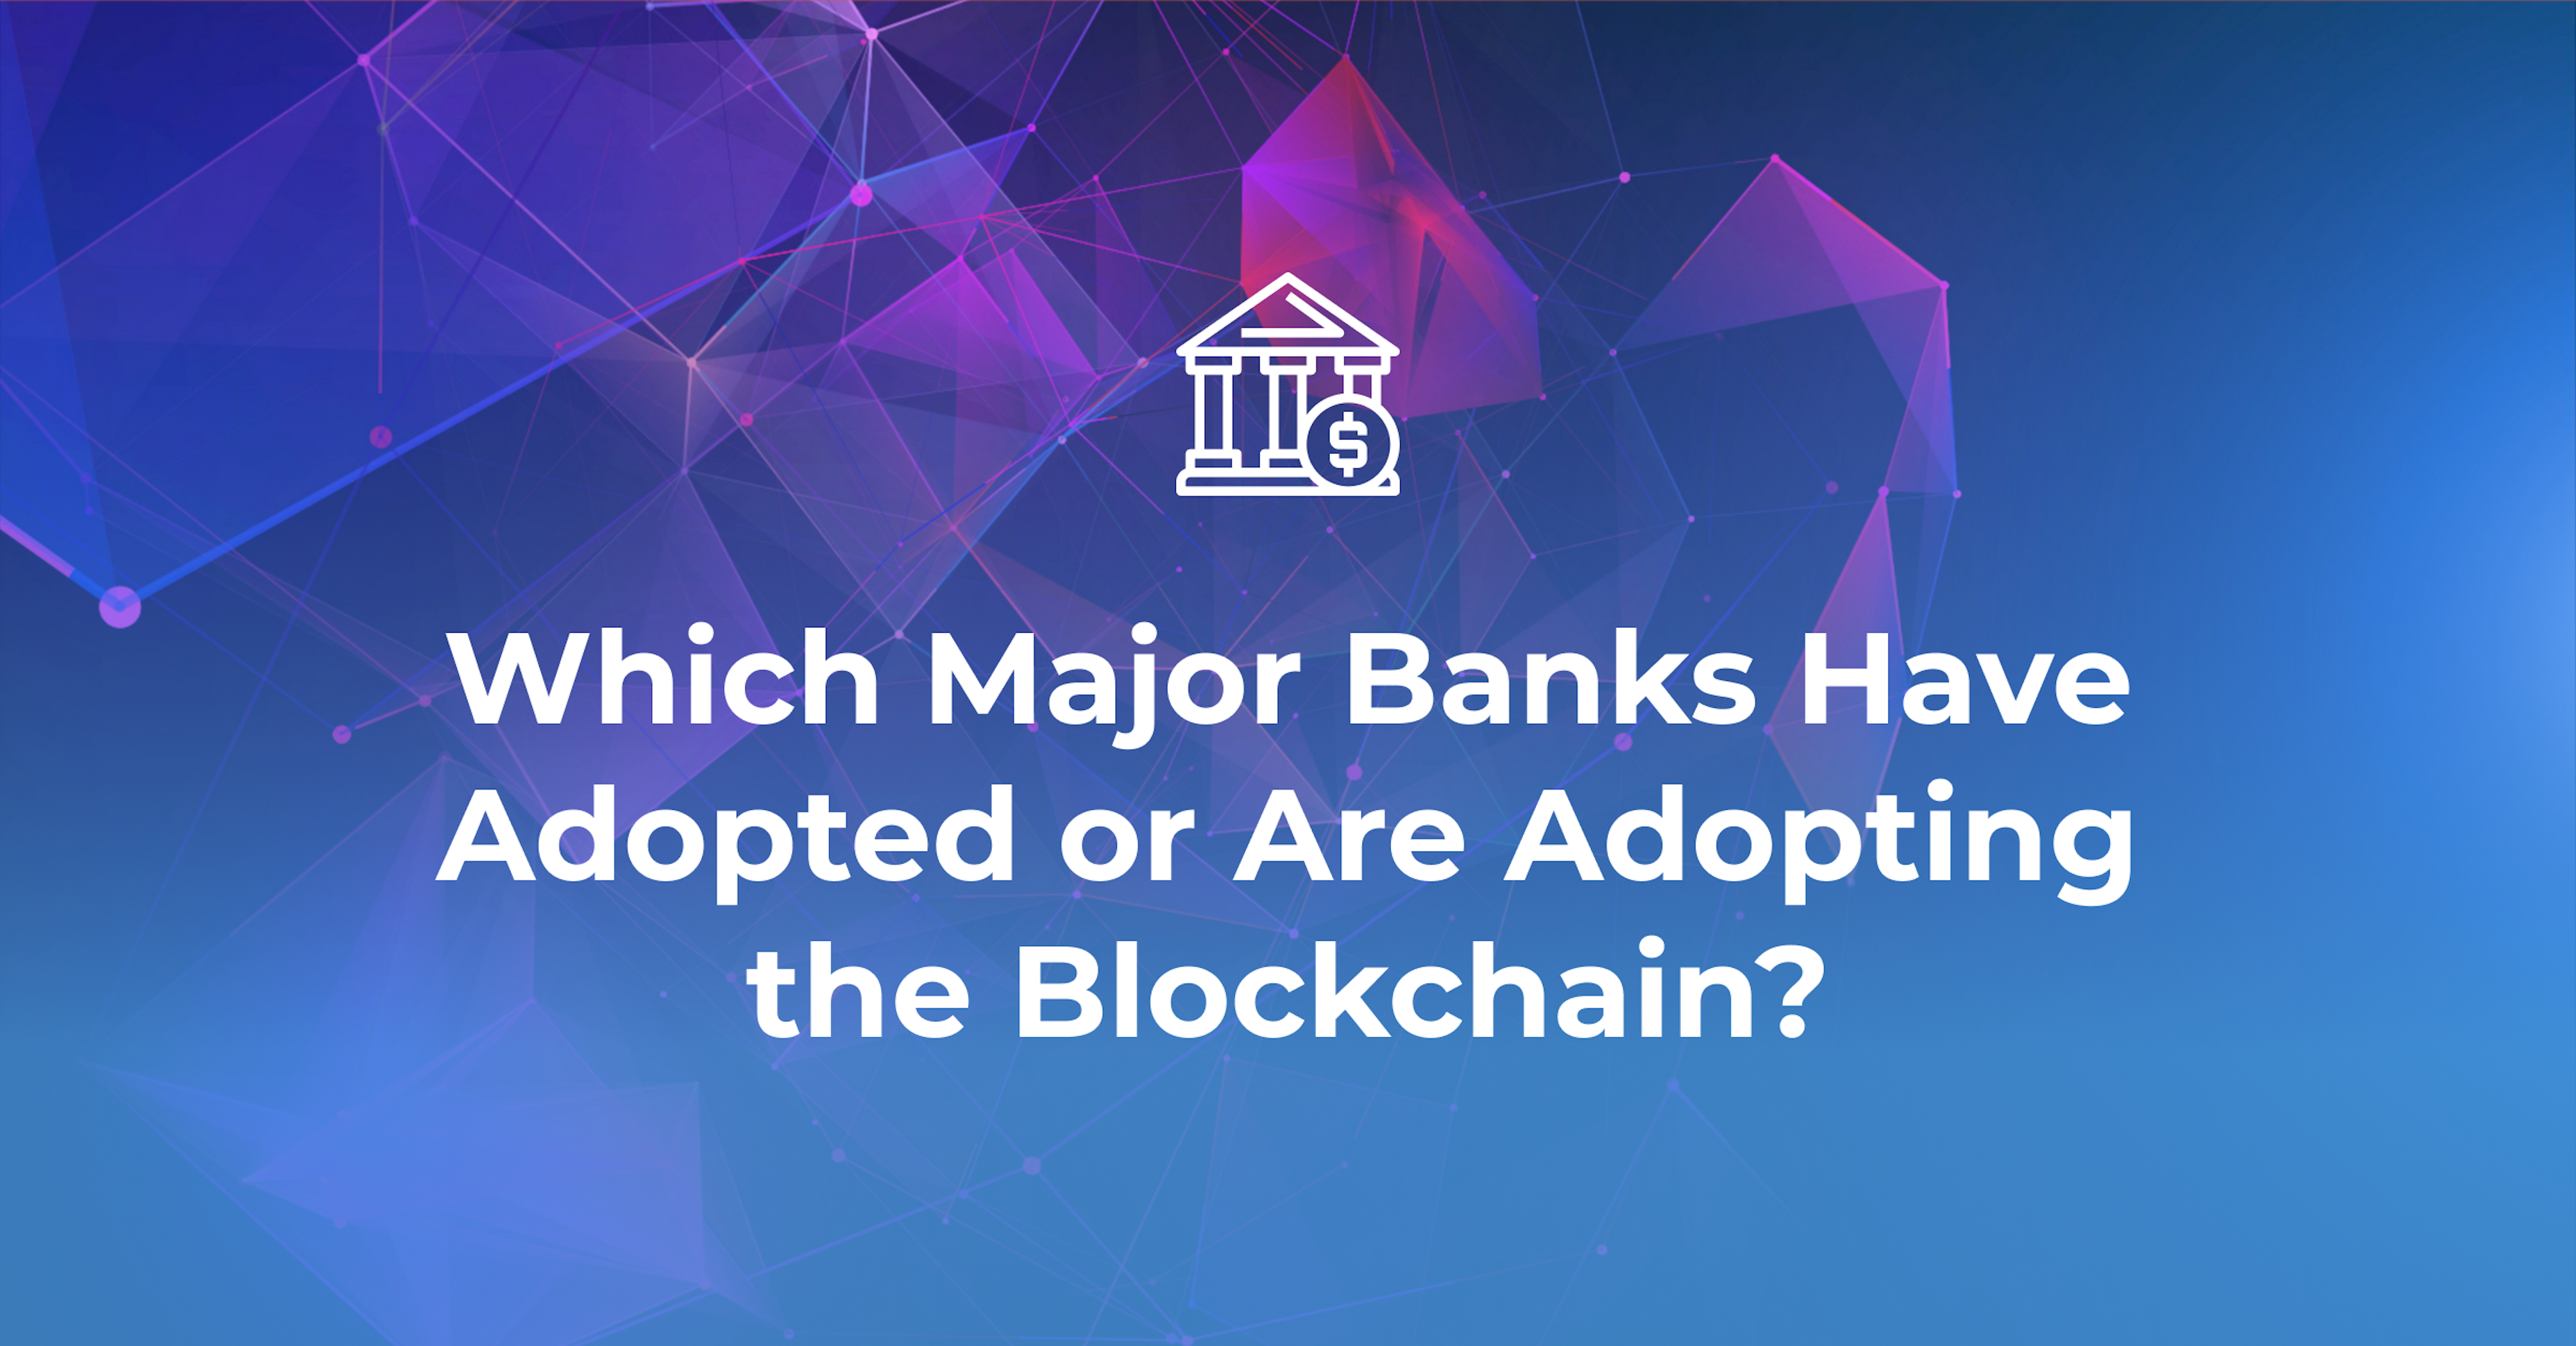 Which Major Banks Have Adopted or Are Adopting the Blockchain?